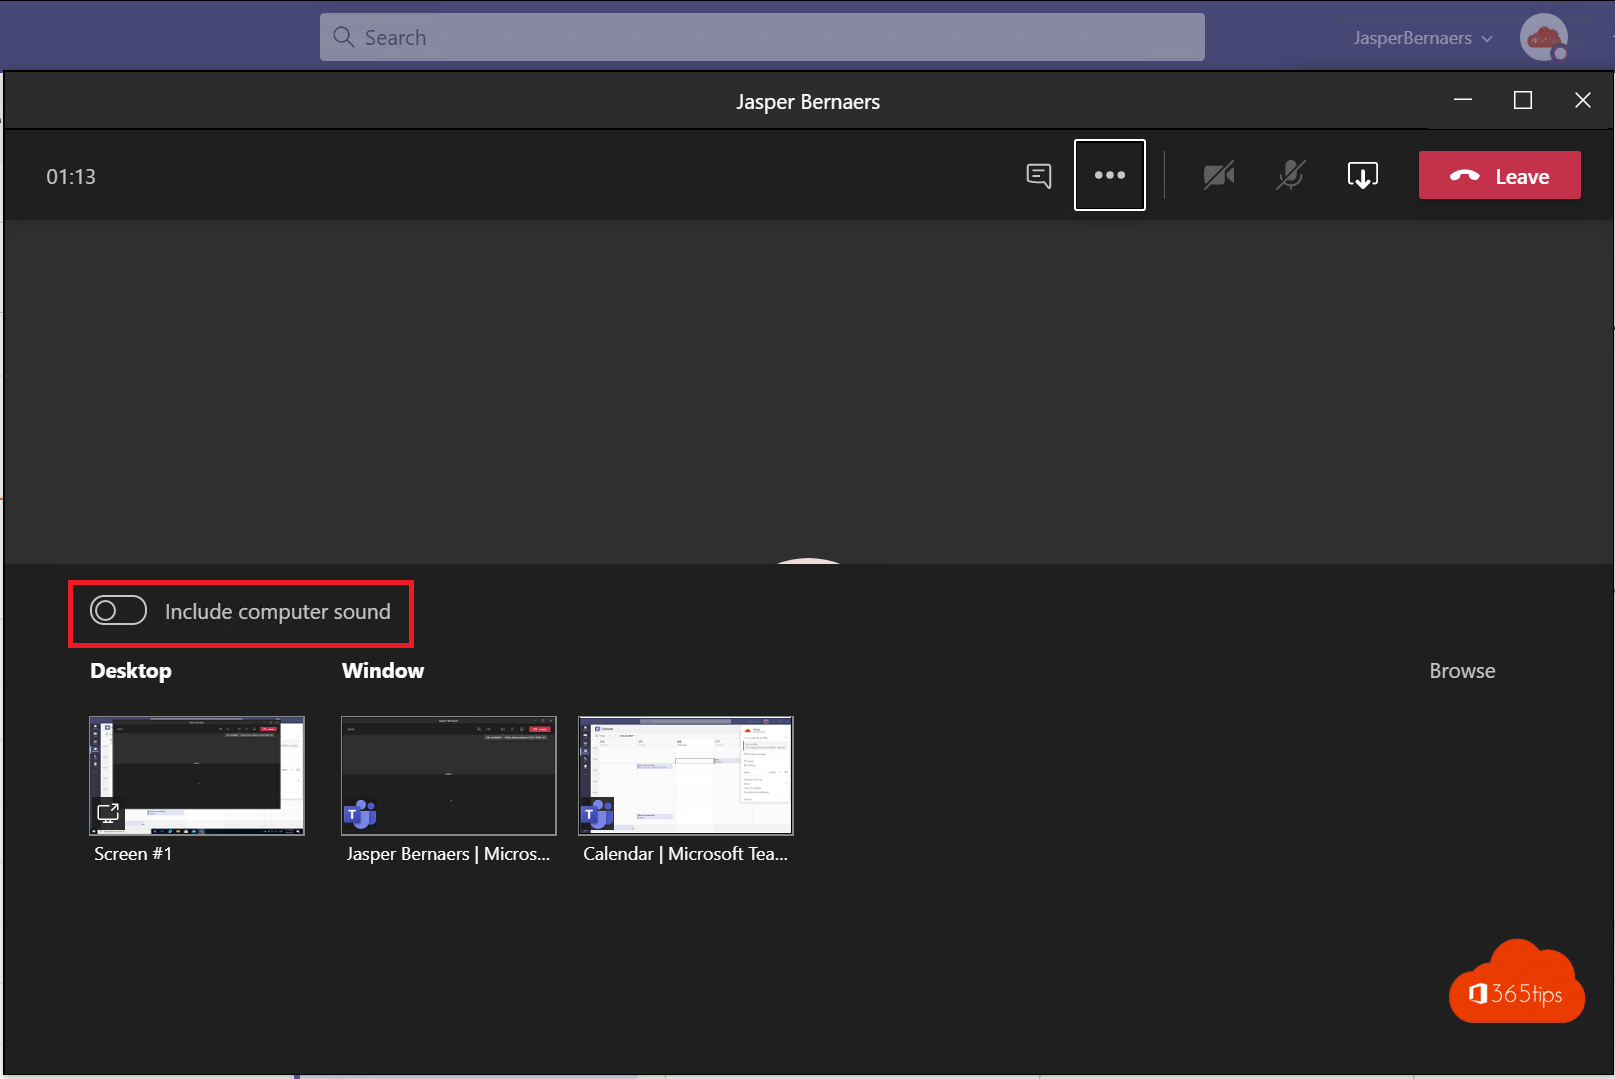 Share your screen with computer audio in Microsoft Teams | Windows + Mac